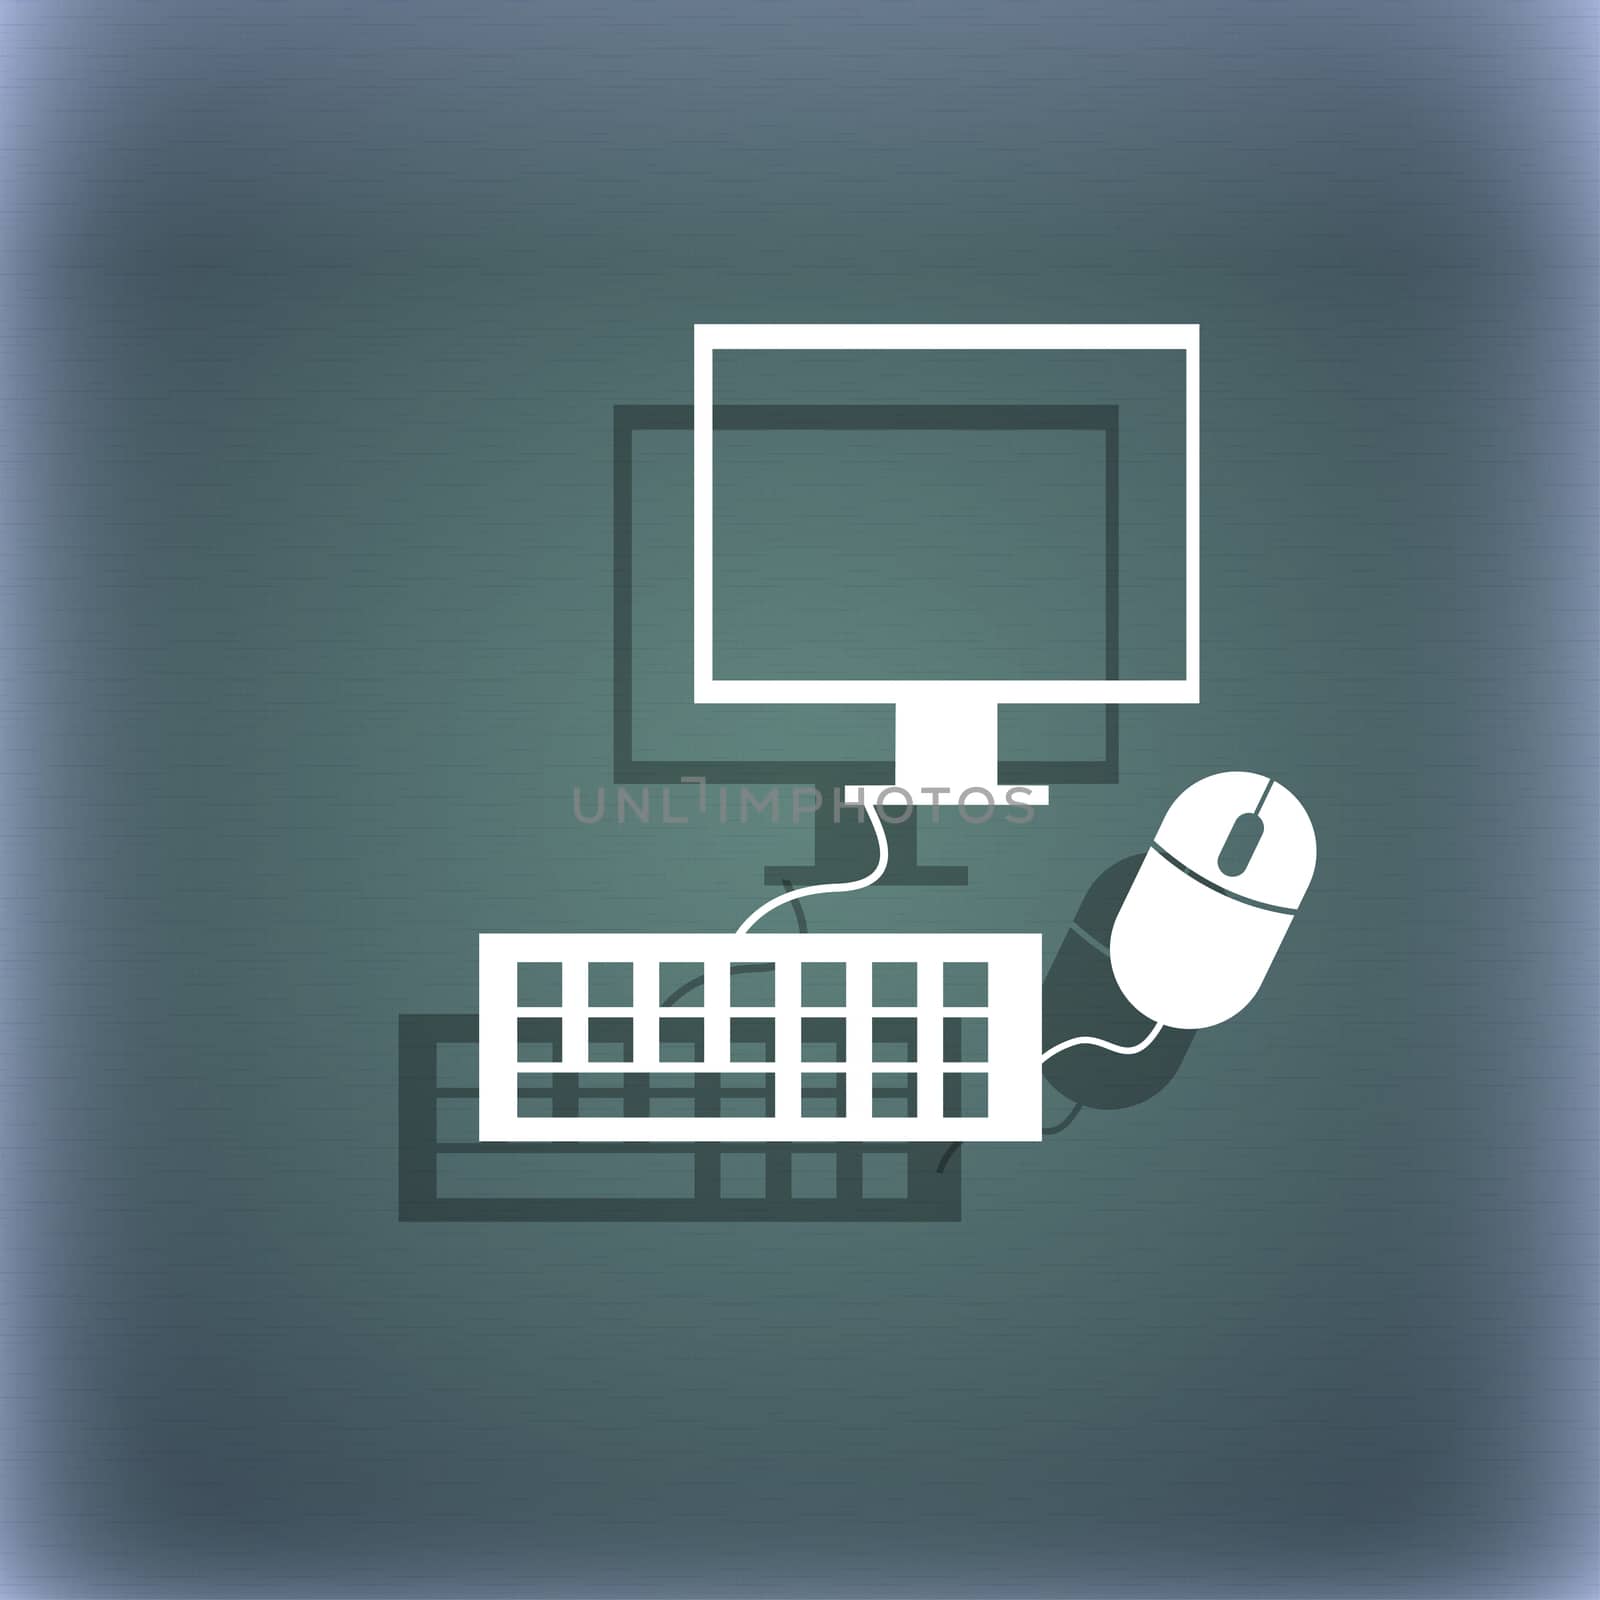 Computer widescreen monitor, keyboard, mouse sign icon. On the blue-green abstract background with shadow and space for your text. illustration